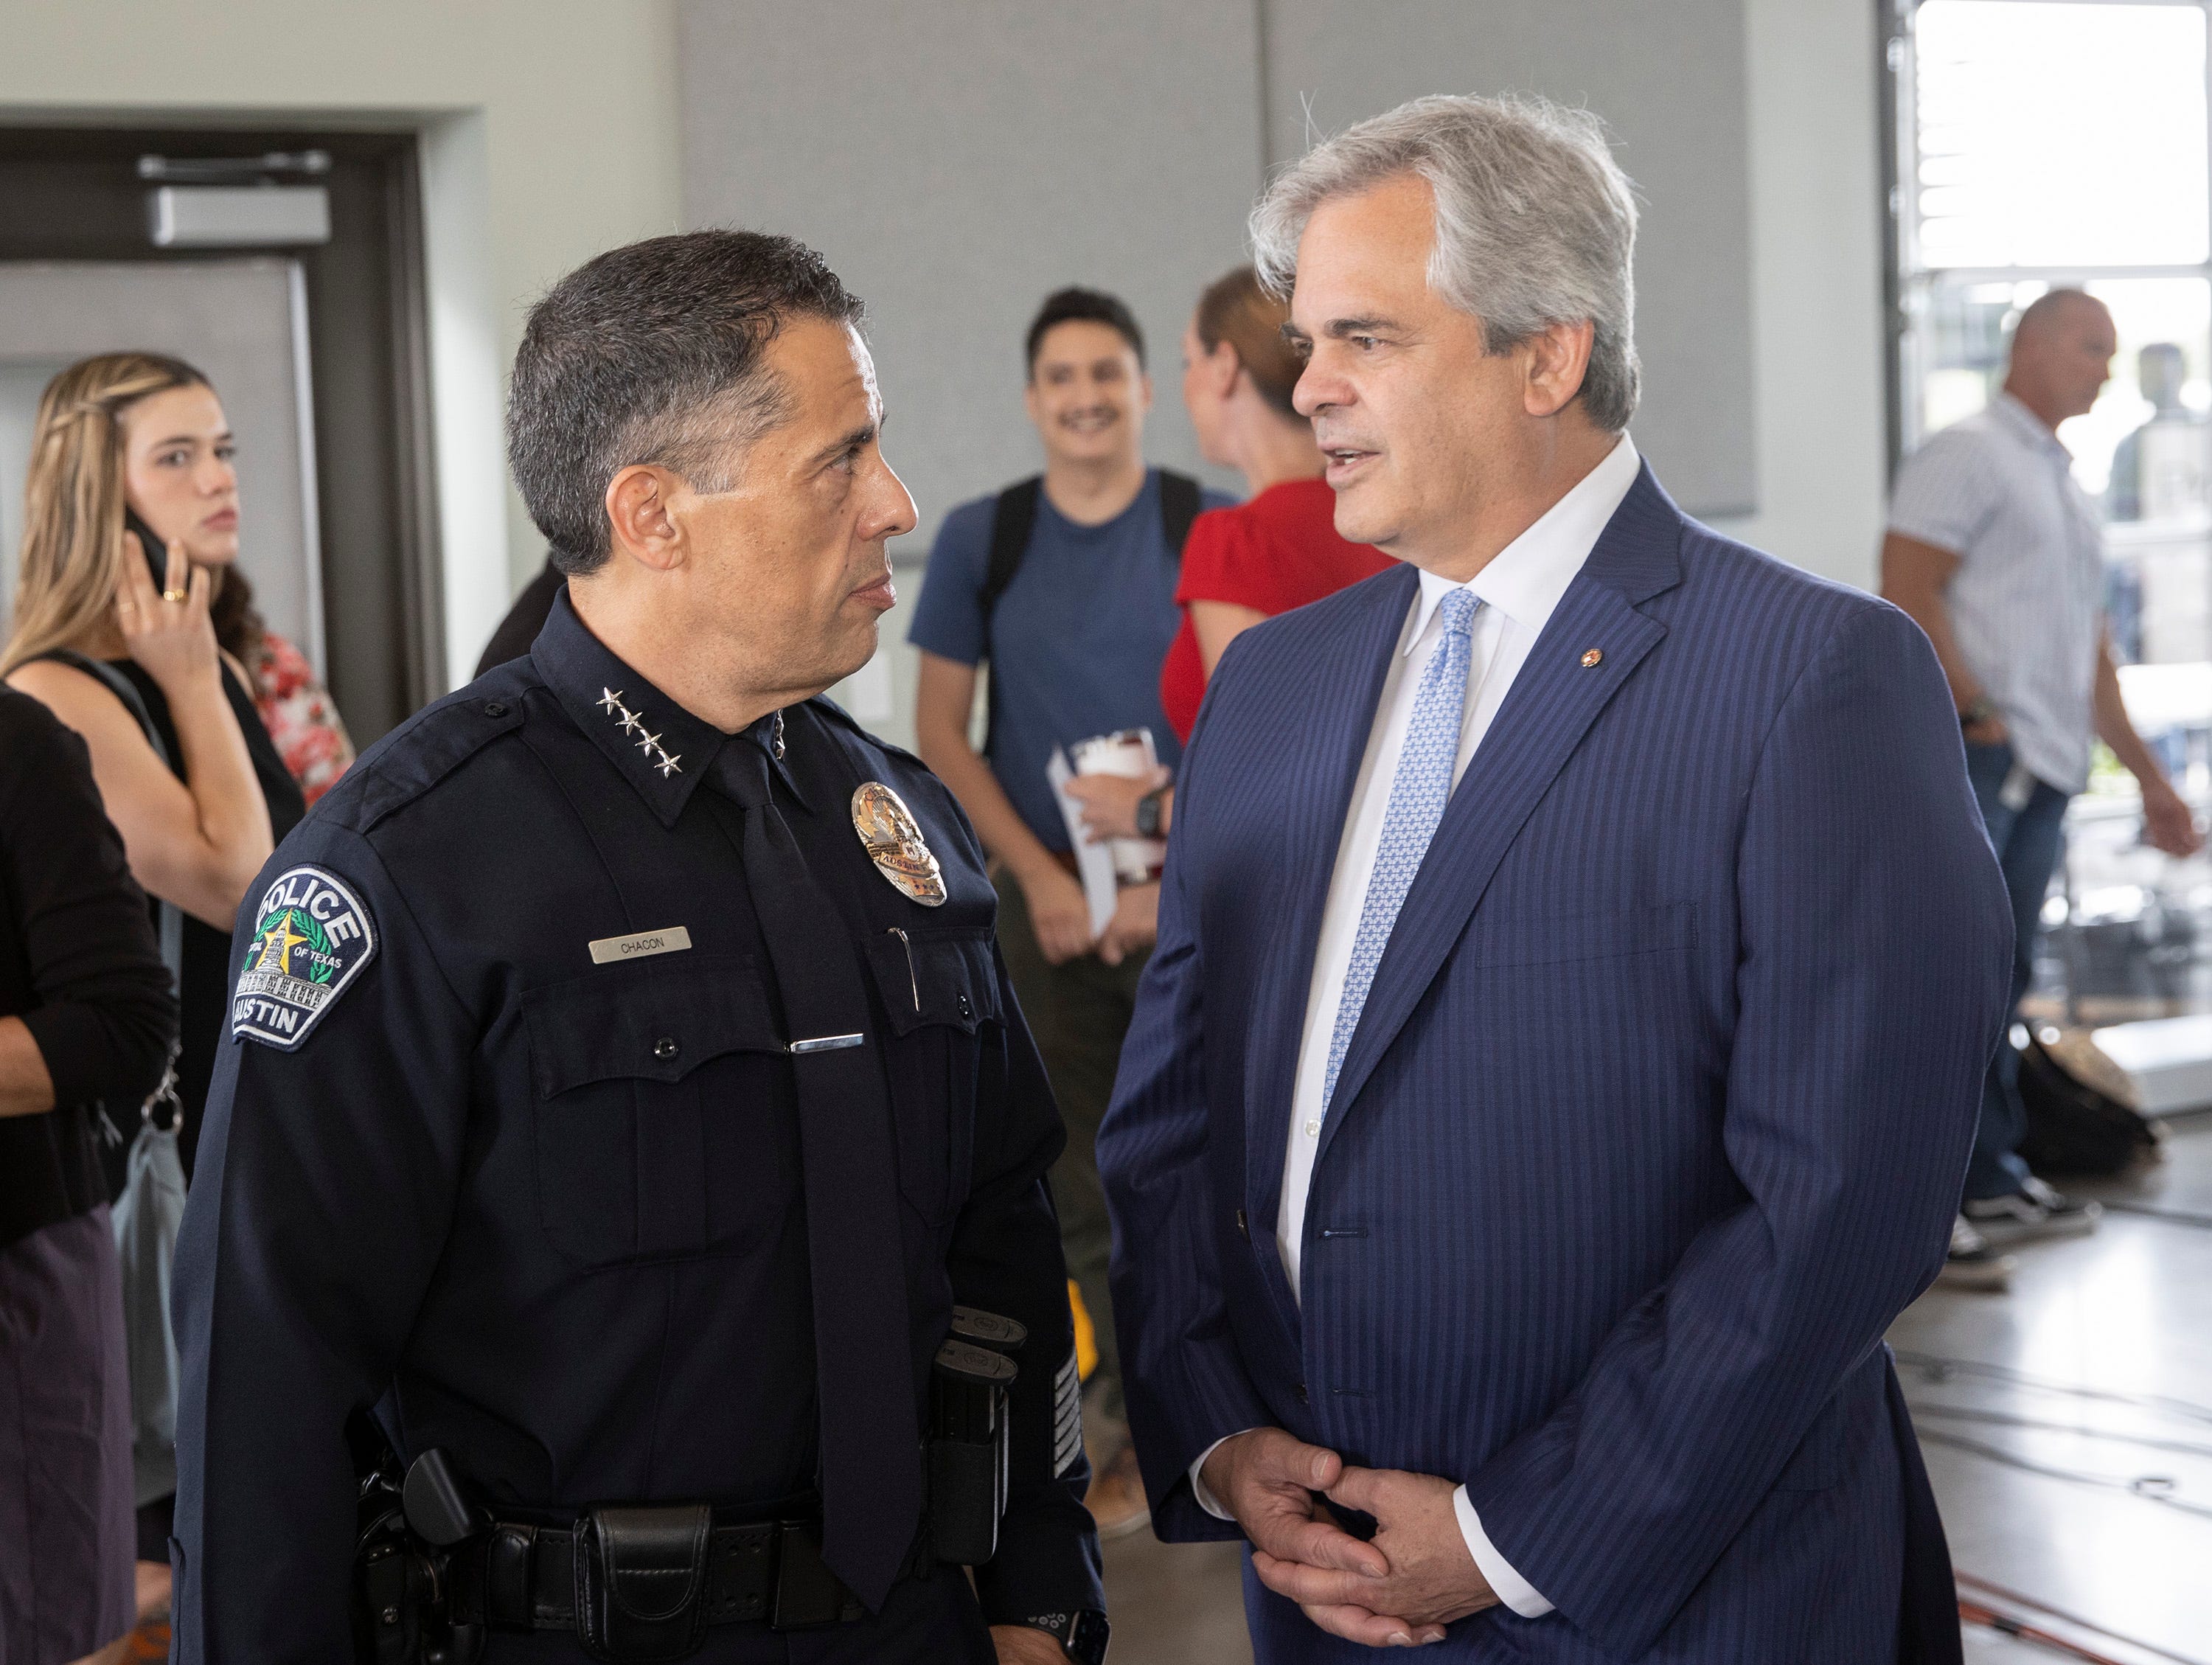 Interim Police Chief Joe Chacon talks to Mayor Steve Adler in July before City Manager Spencer Cronk presented a proposed 2021-22 budget. The 2020-21 budget cut funding for the Police Department, and city officials suspended three cadet classes in a row.